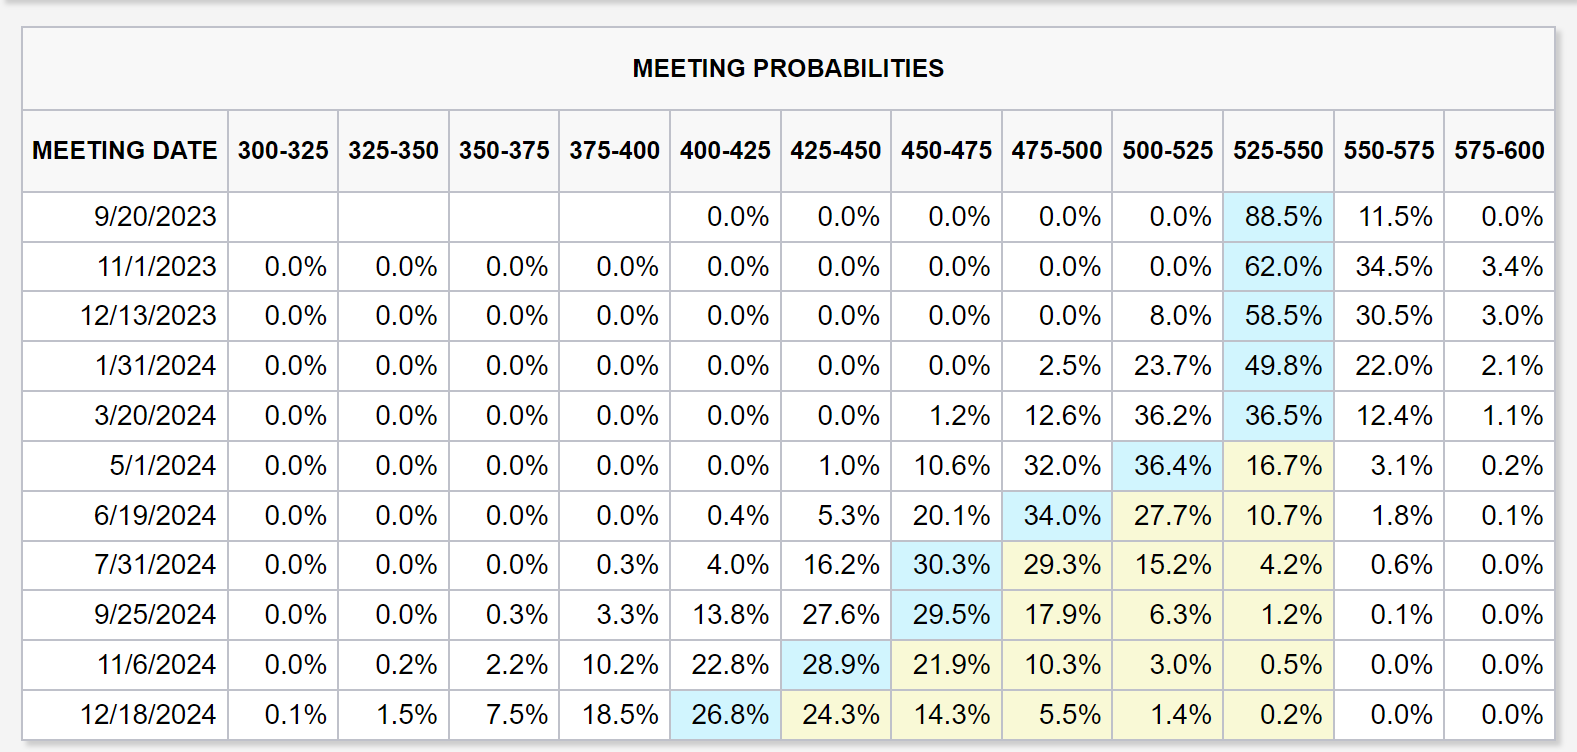 CME FedWatch tool probabilities